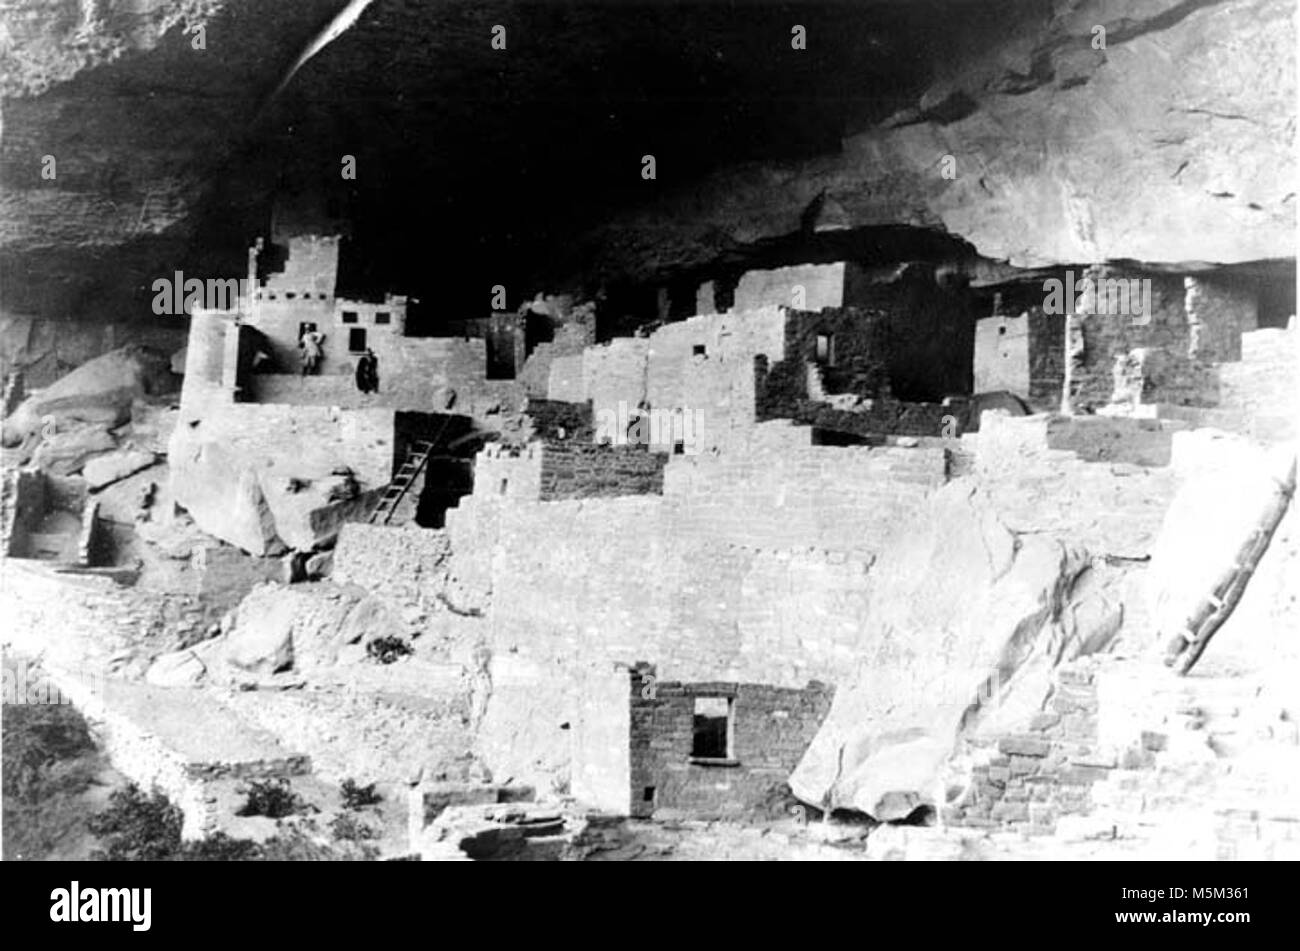 Grand Canyon Historic- Mesa Verde-Reference For Desert View Watchtower . MARY COLTER (L) EXAMINS CLIFF PALACE AT MESA VERDE NP (RESEARCHING DV WATCHTOWER) GRCA 18641 CIRCA 1931 FRED HARVEY CO. Stock Photo